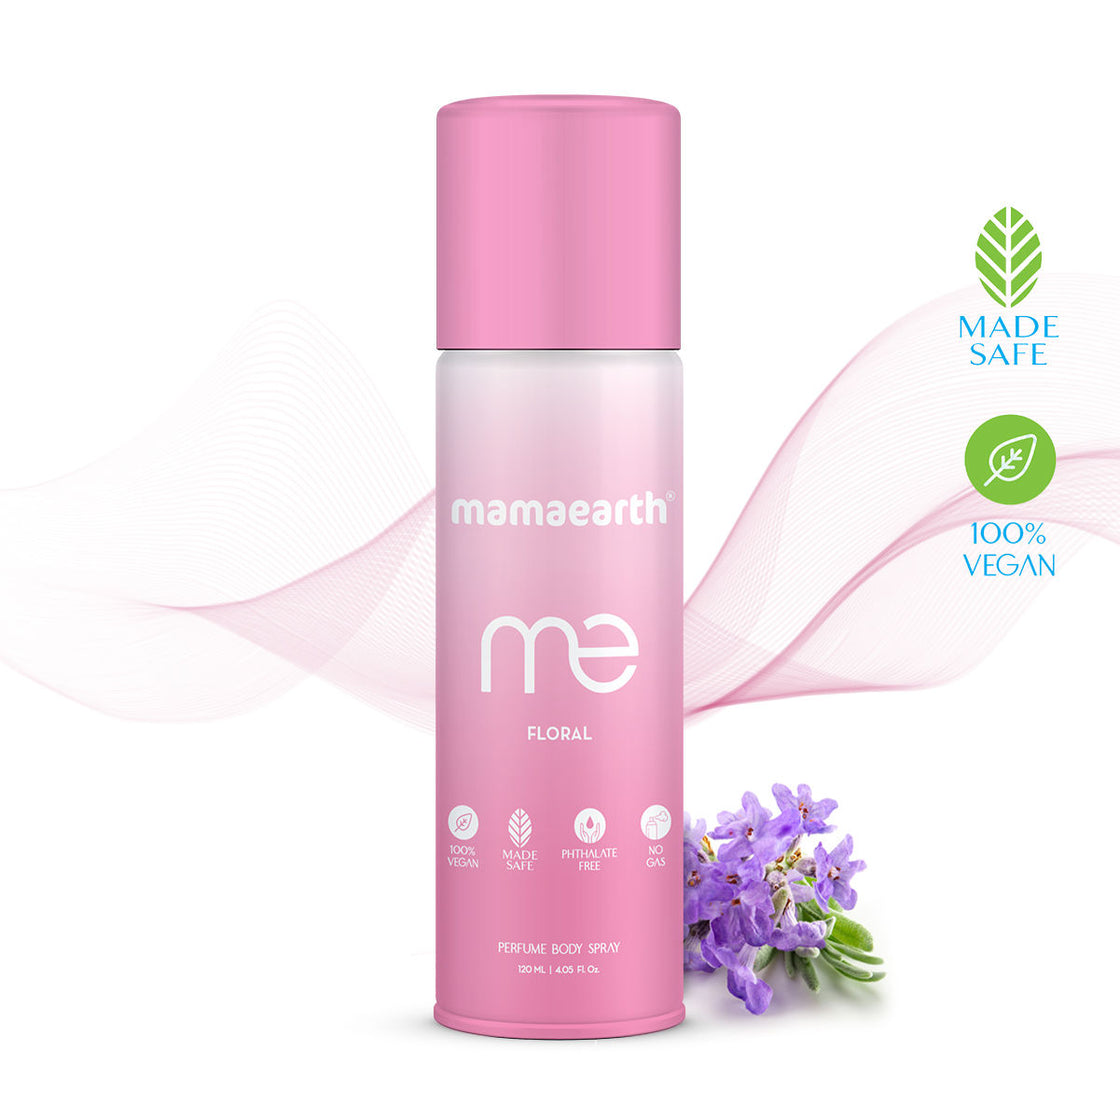 Mamaearth Me Floral Deodorant- For Her (120ml)-2